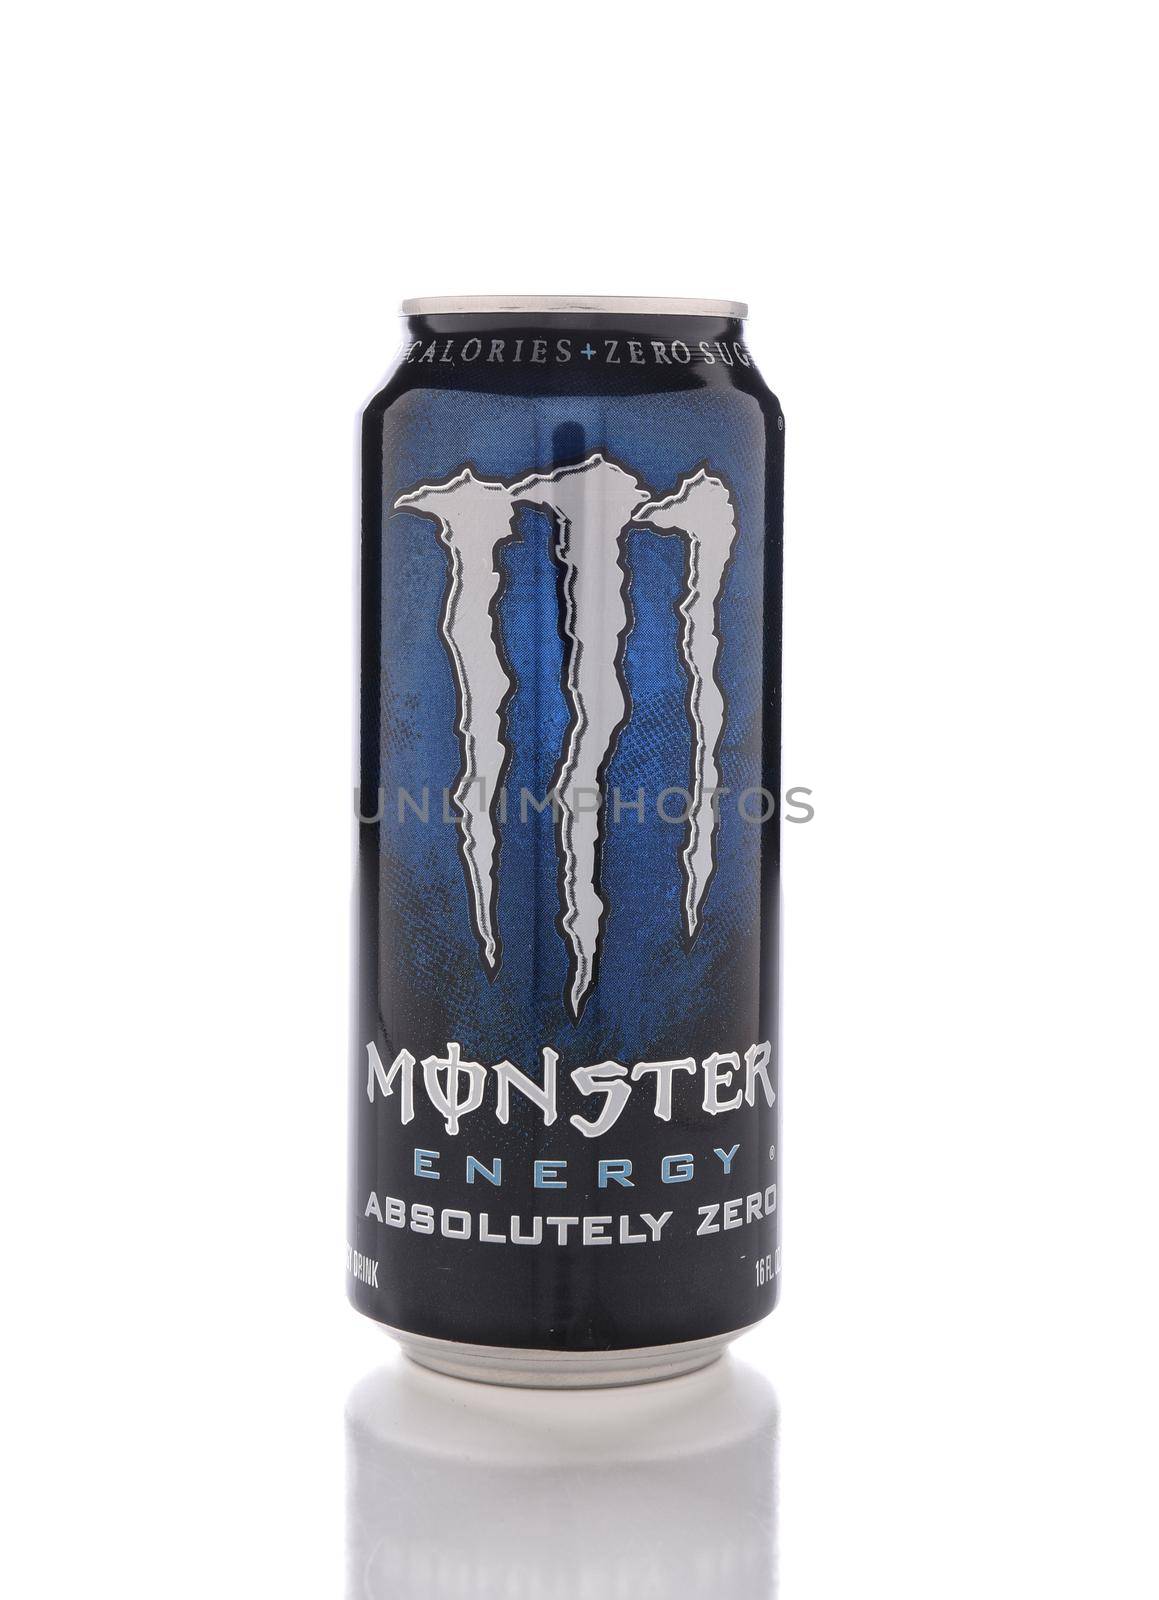 IRVINE, CA - January 13, 2017: A can of Monster Energy Absolutely Zero. Introduced in 2002 Monster now has over 30 different drinks with high a caffeine content.